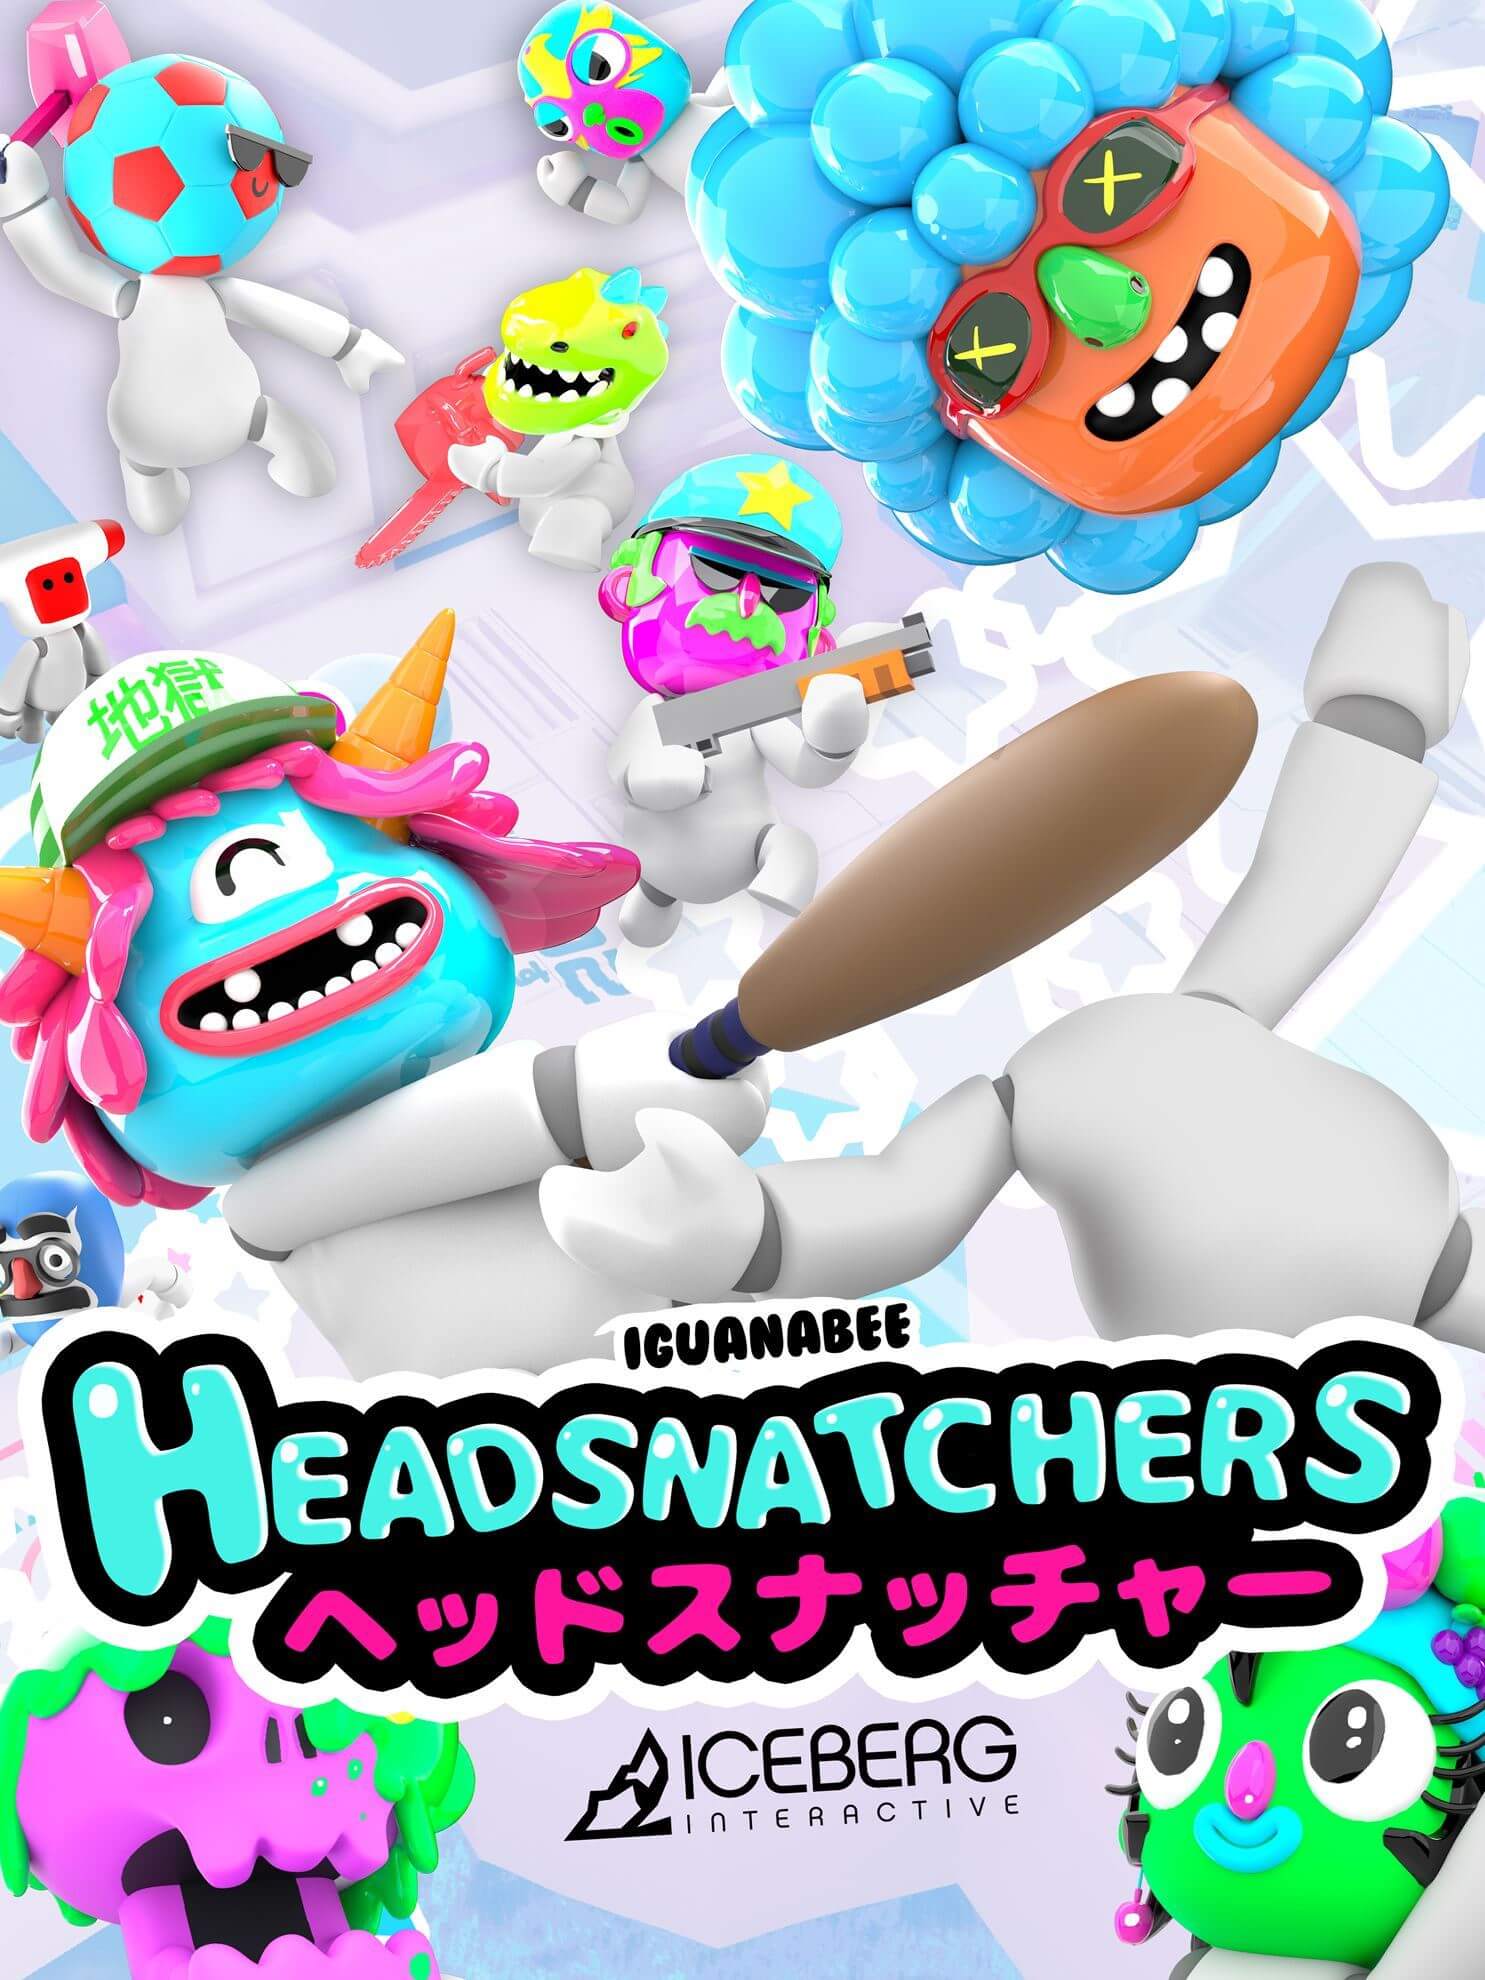 Headsnatchers - Early Access